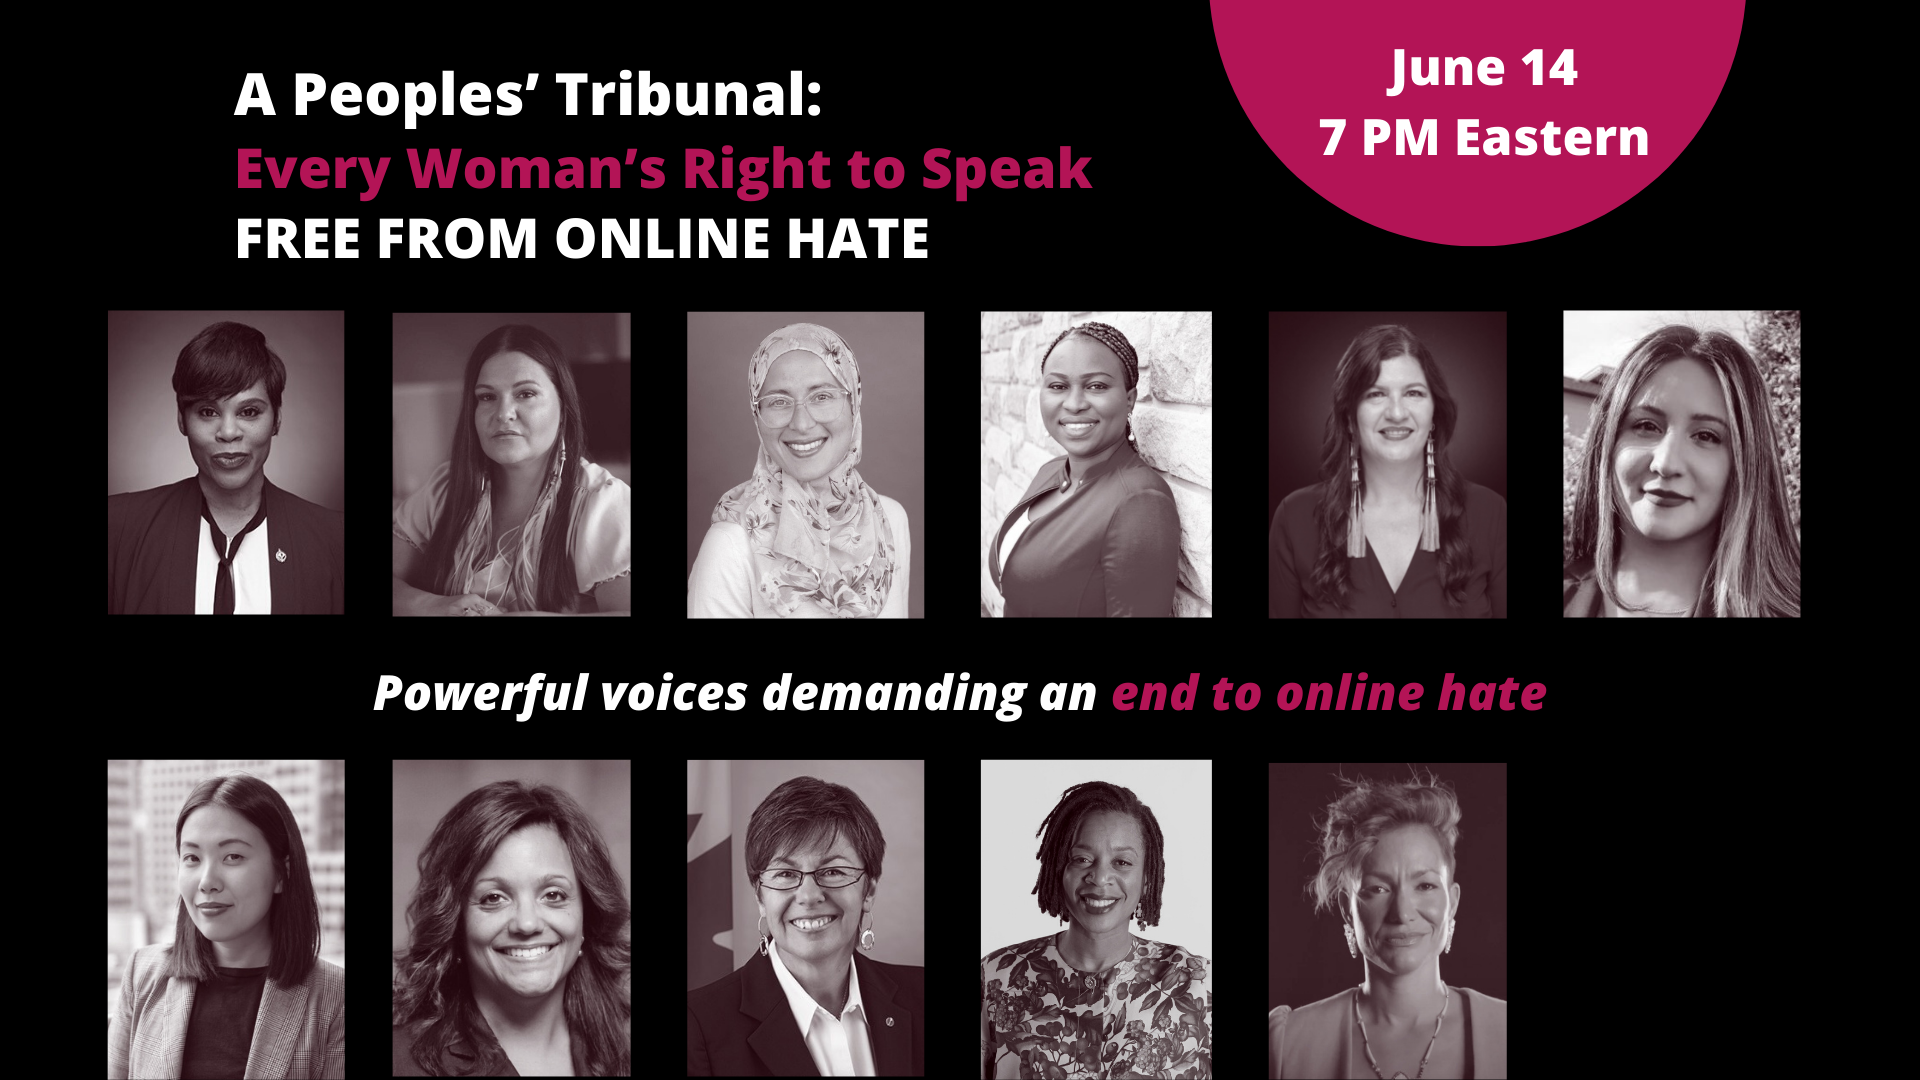 A Peoples’ Tribunal: Every Woman’s Right To Speak Free from Online Hate